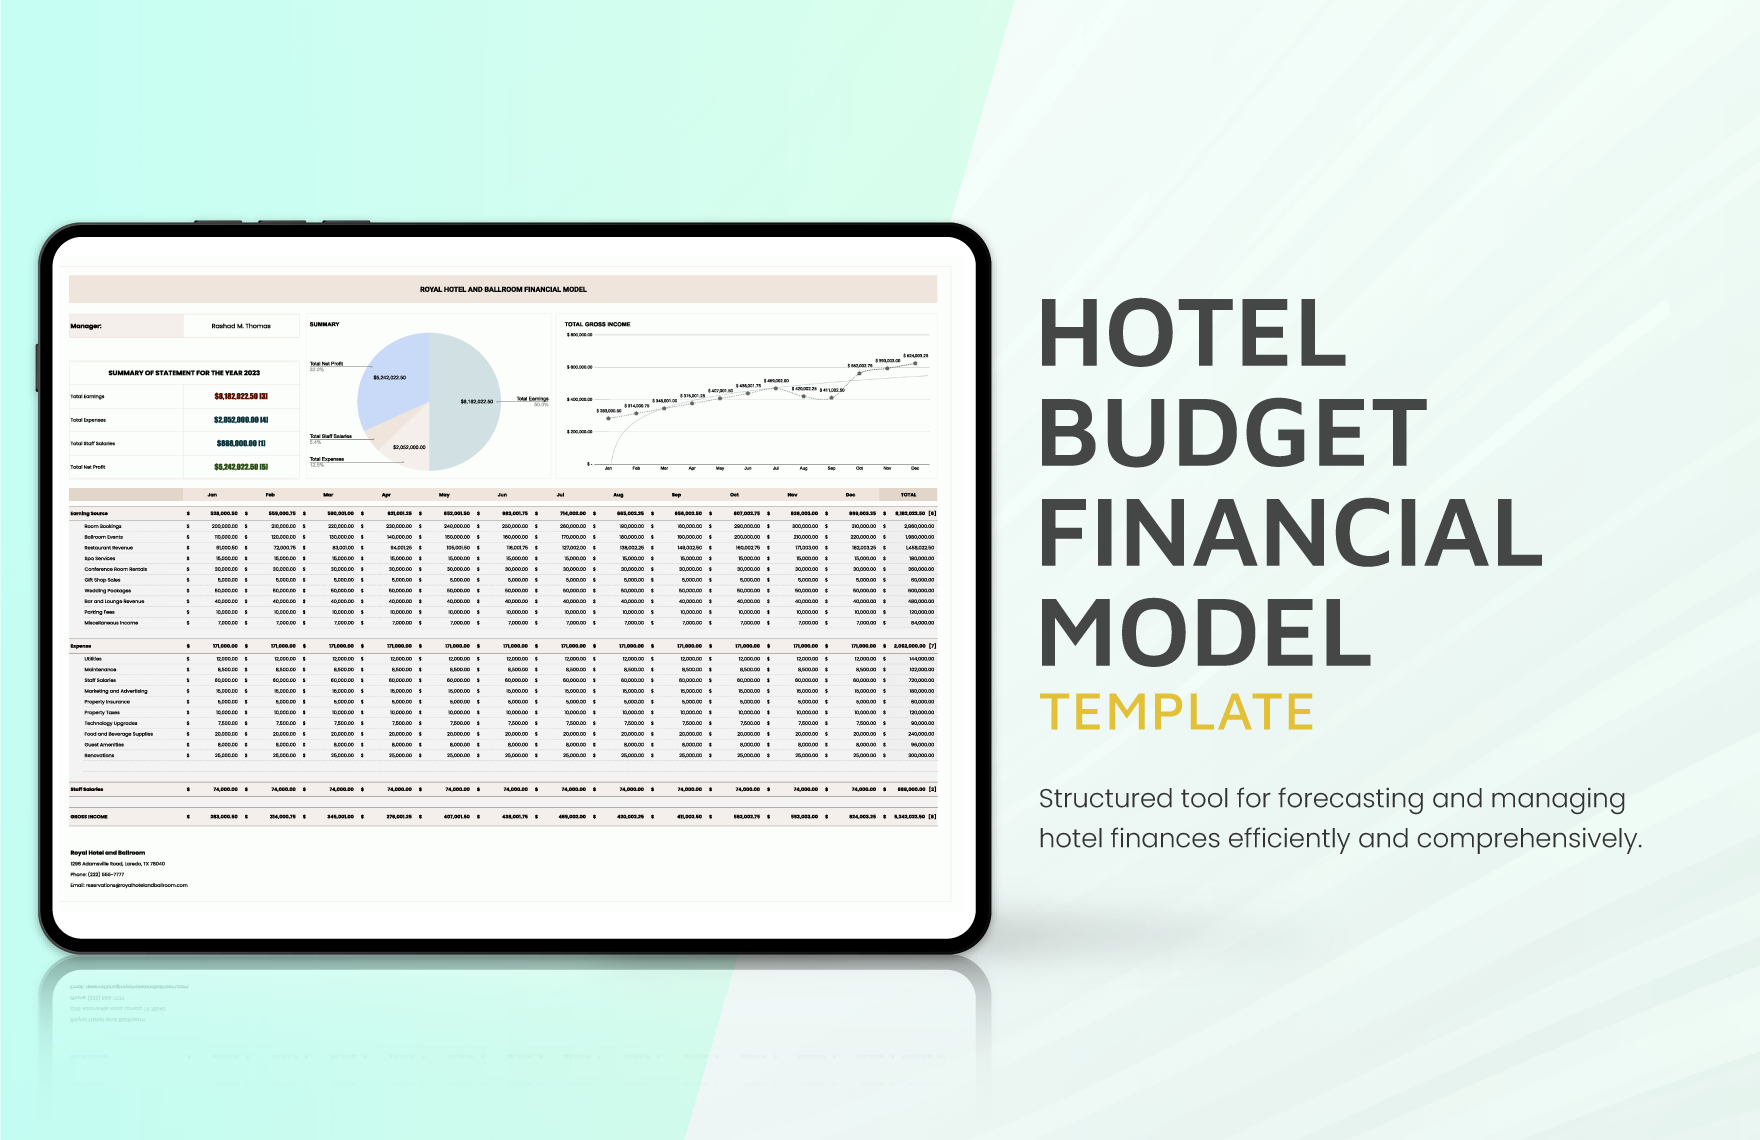 Hotel Budget Financial Model Template